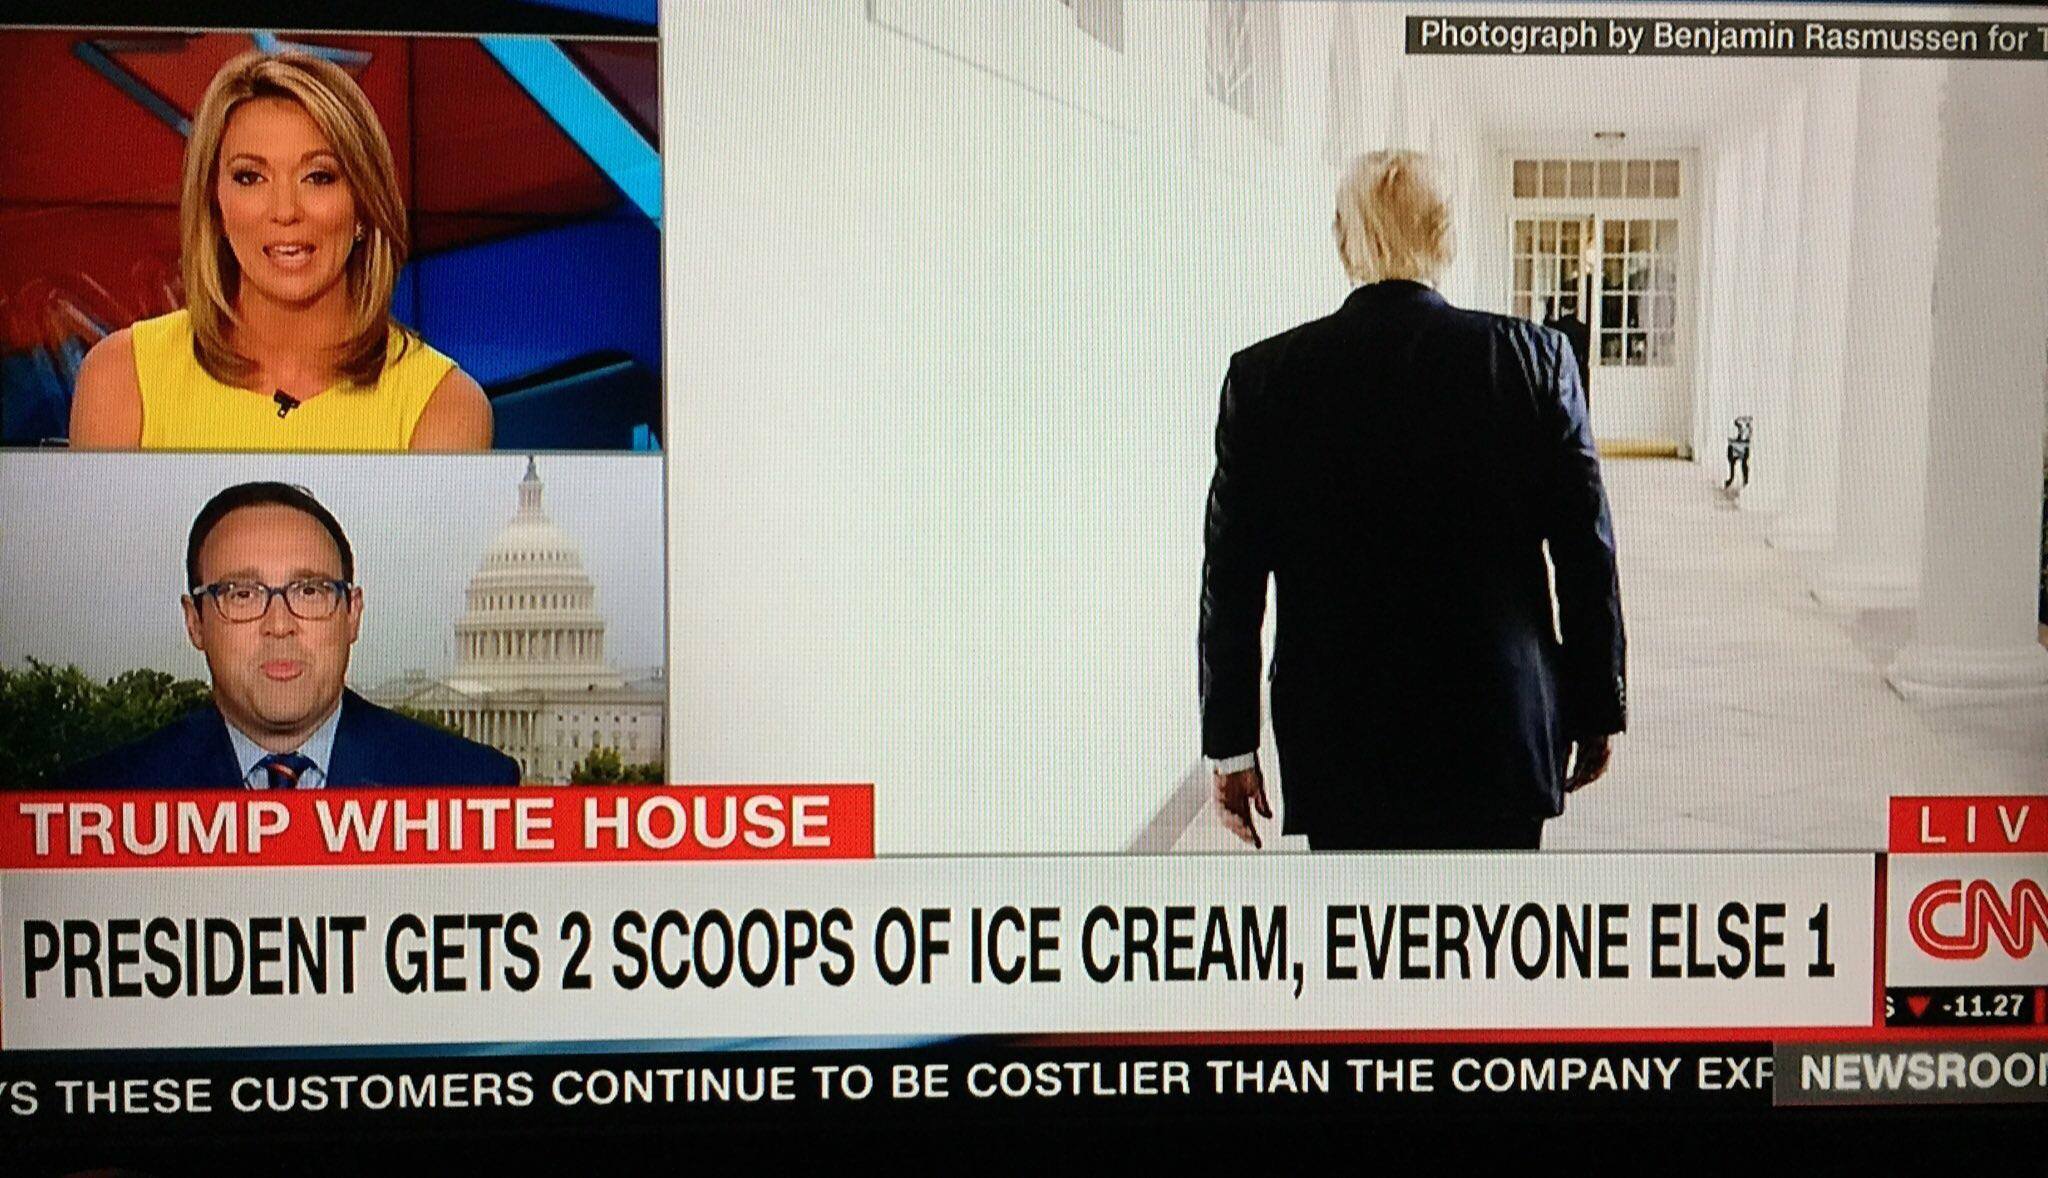 From now on, I'm going to get 2 scoops...